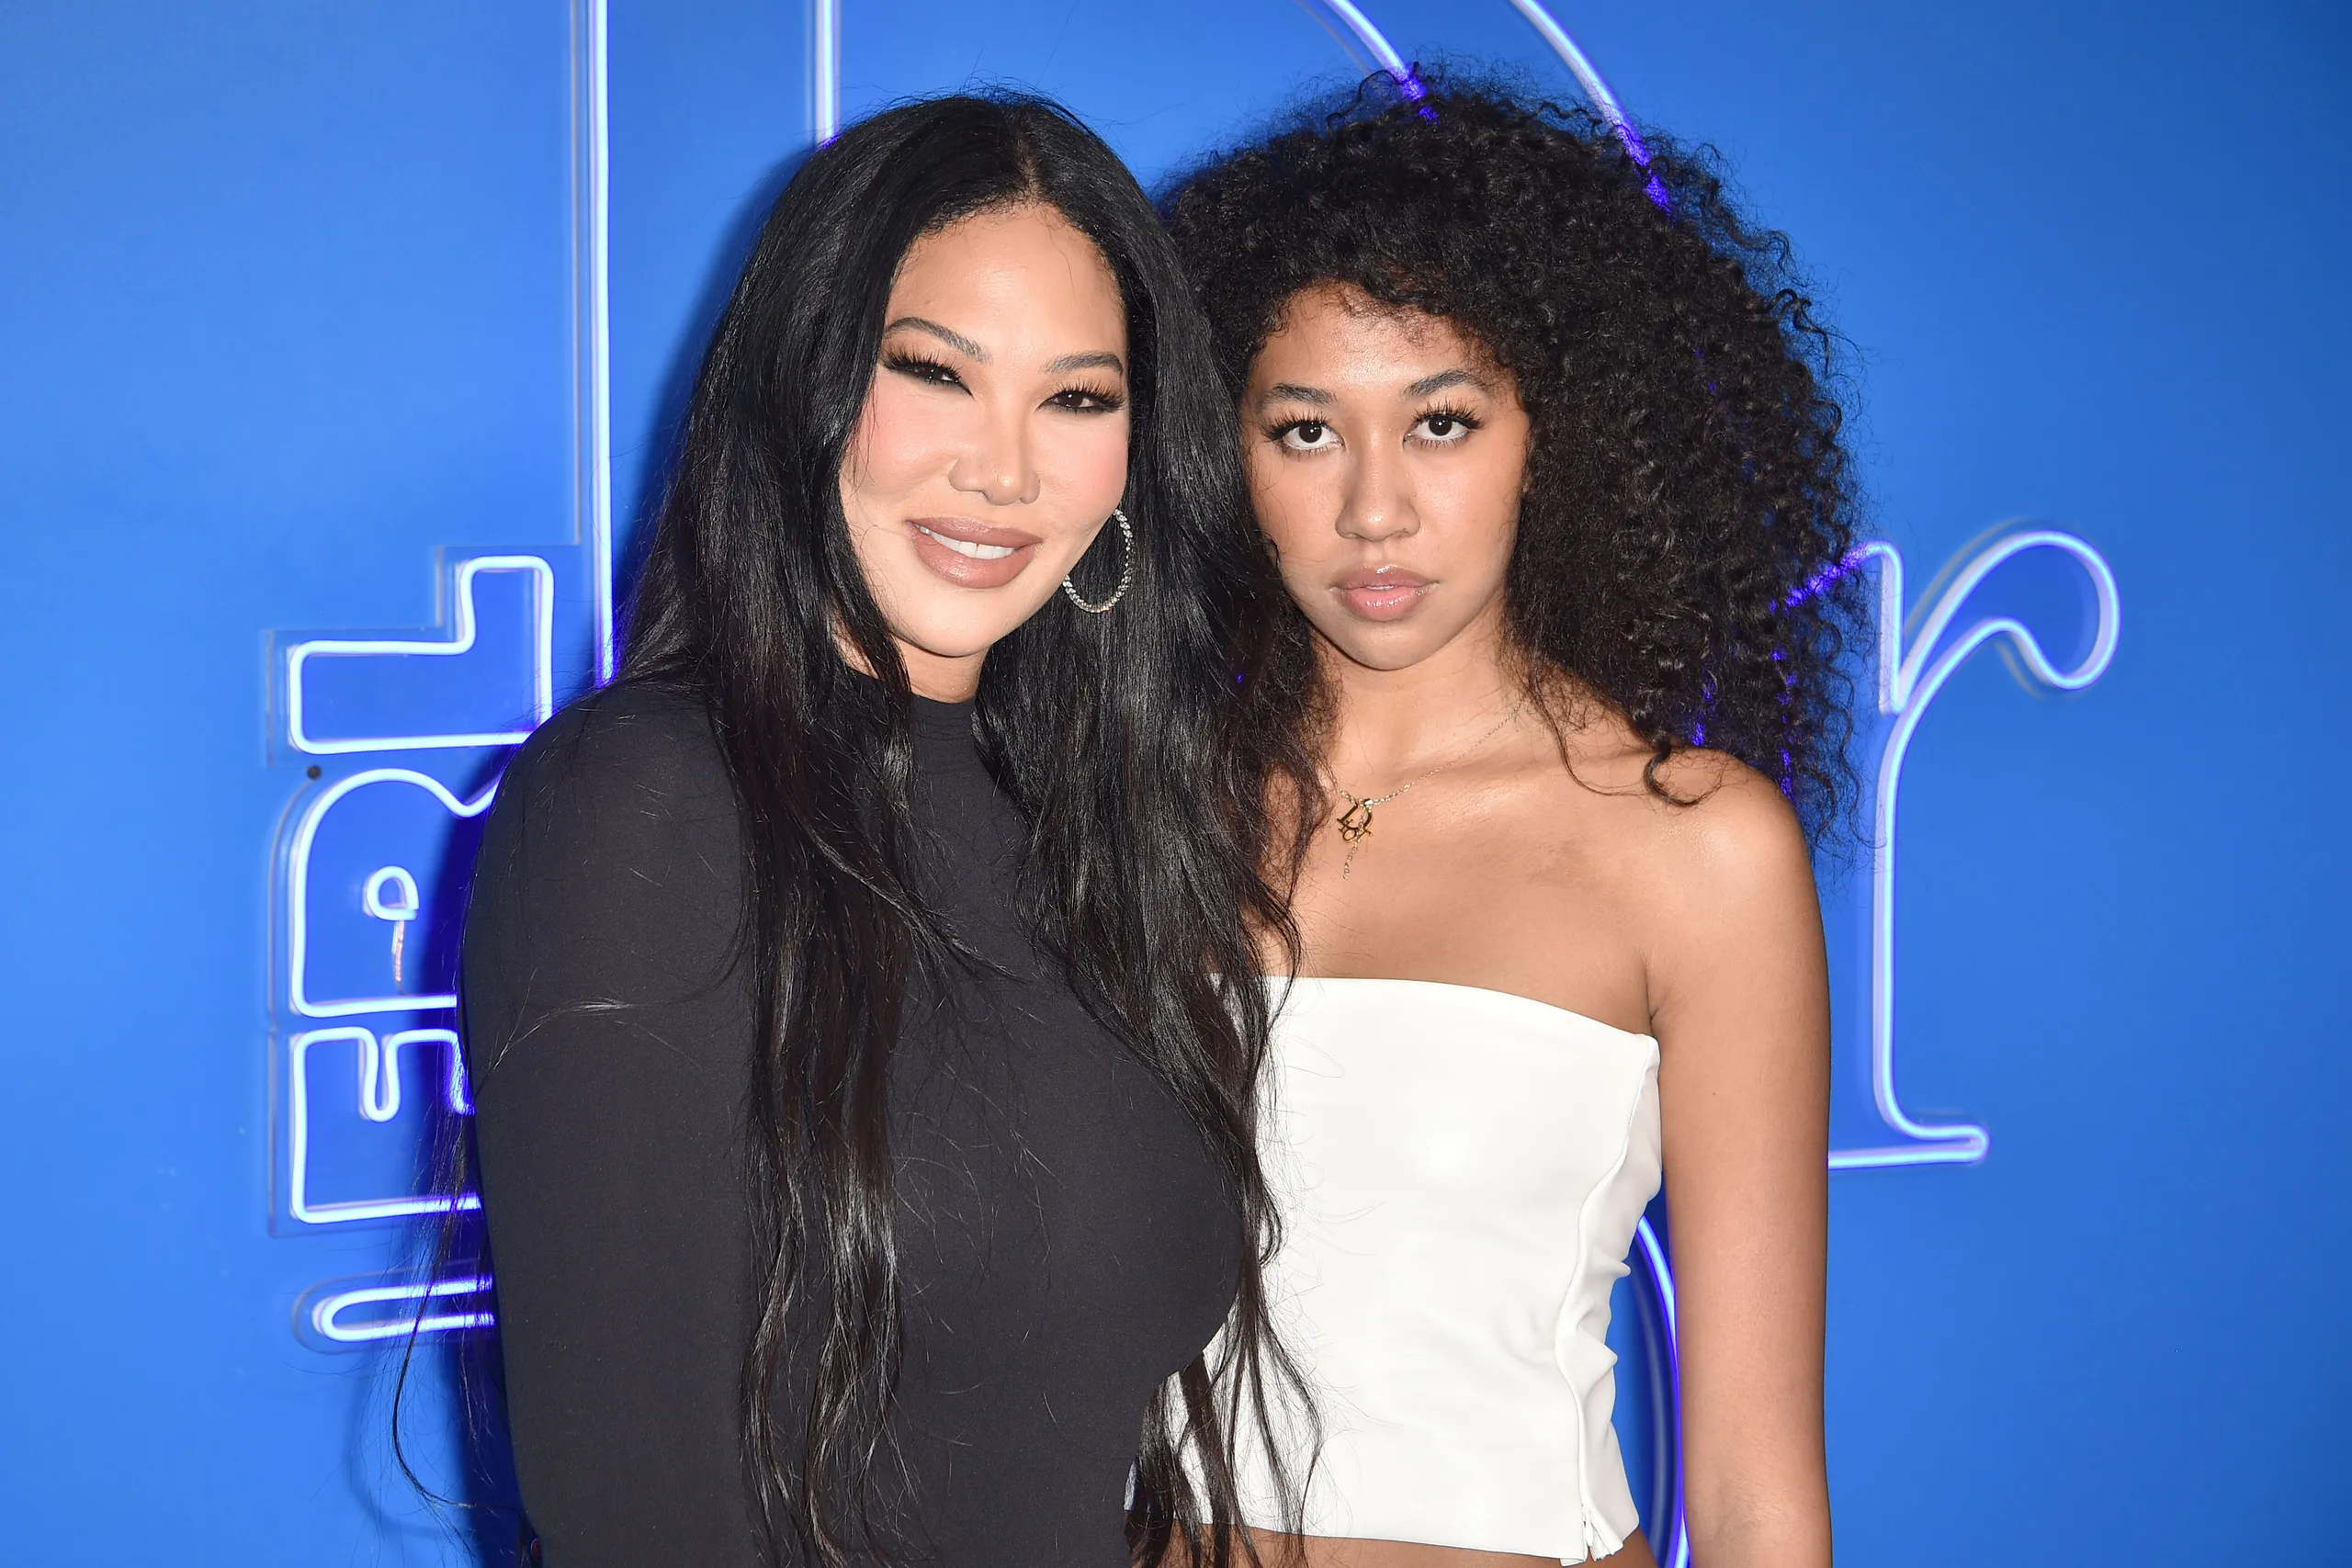 Kimora Lee Simmons Seemingly Reacts to Daughter Aoki, 21, Dating and Kissing Vittorio Assaf, 65, with Cryptic Post